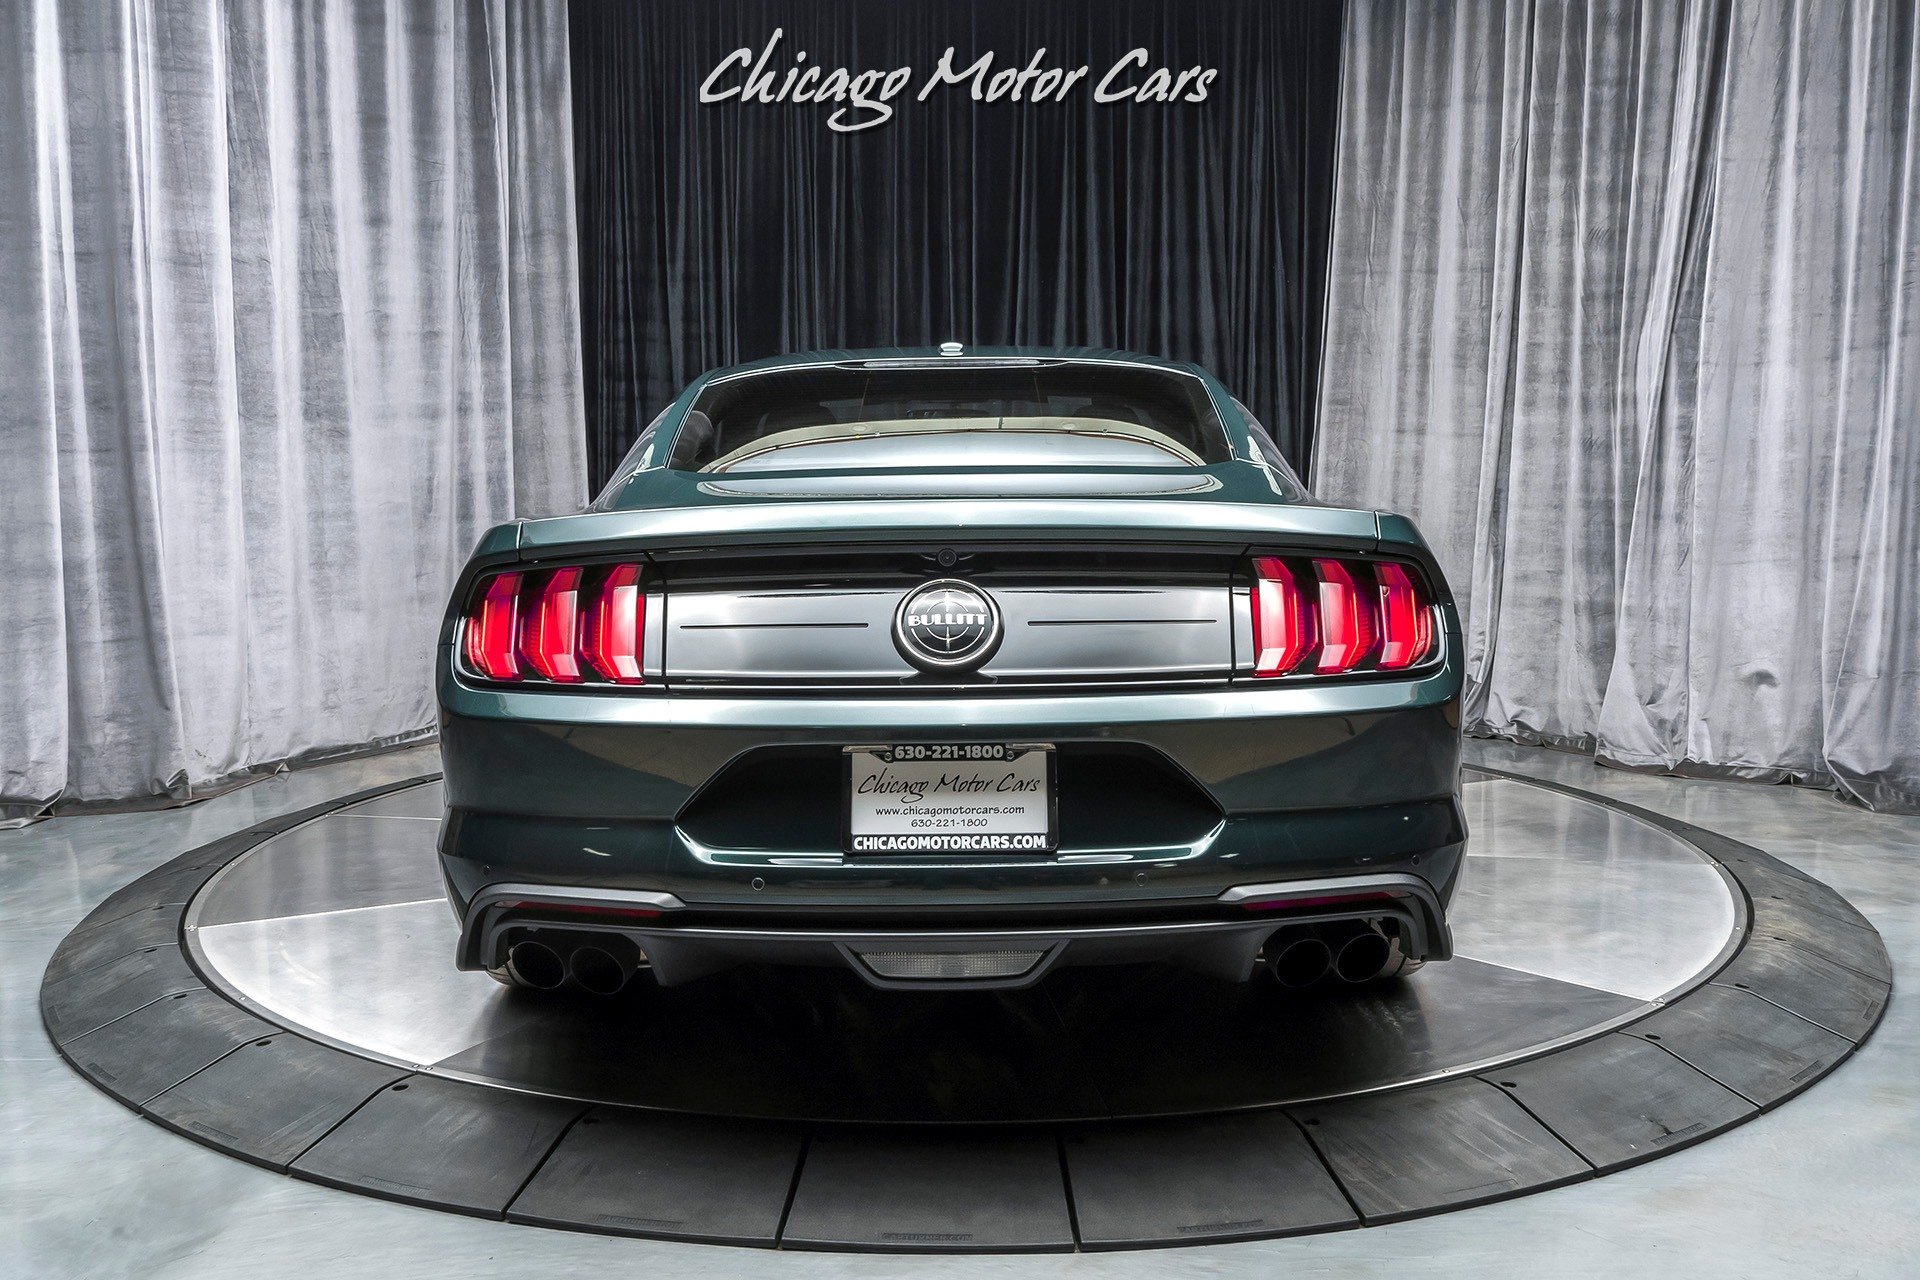 Used-2019-Ford-Mustang-BULLITT-Magnetic-Ride-and-Electronics-Pkg-480HP-ONE-OWNER